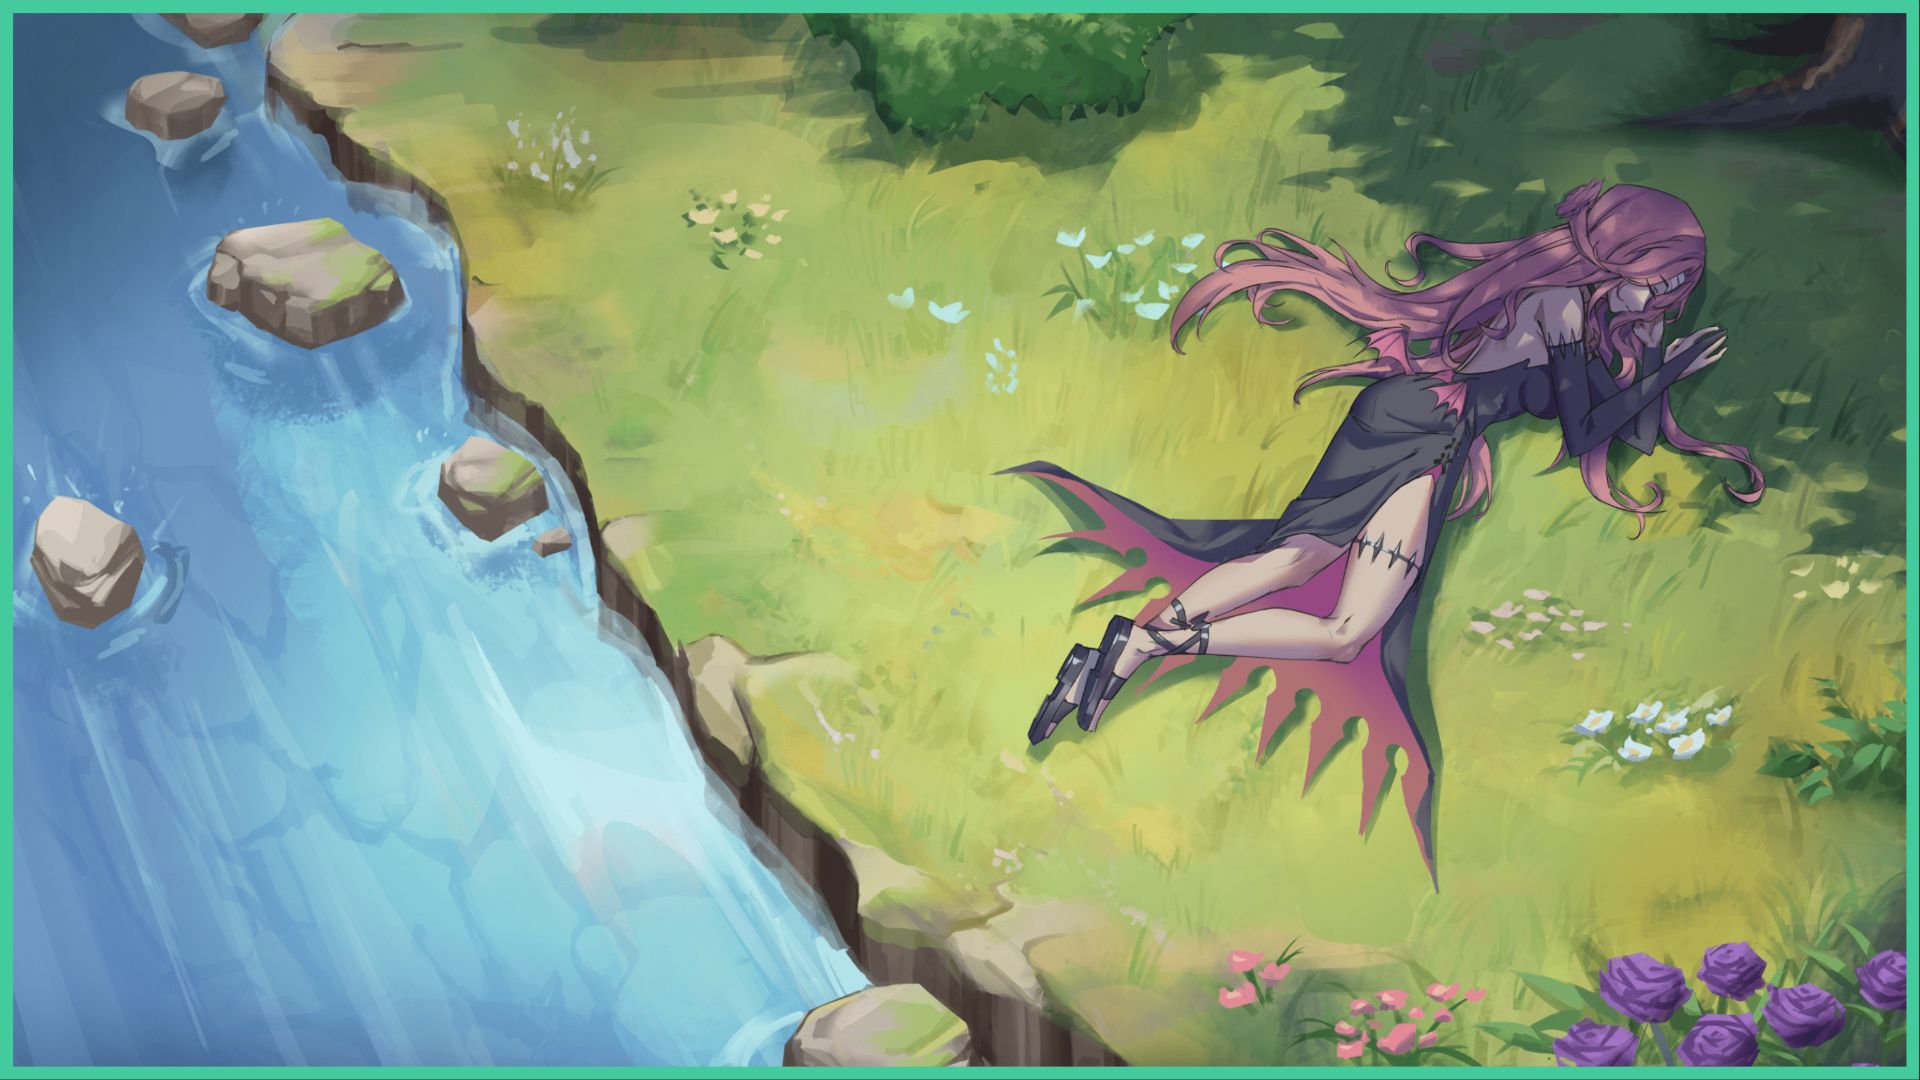 feature image for our tales of two heroes news, the image features promo art for the game of the demon character laying down on the grass in the shade below a tree, there is a stream close by as flowers are sprinkled across the grass, the character seems to be asleep